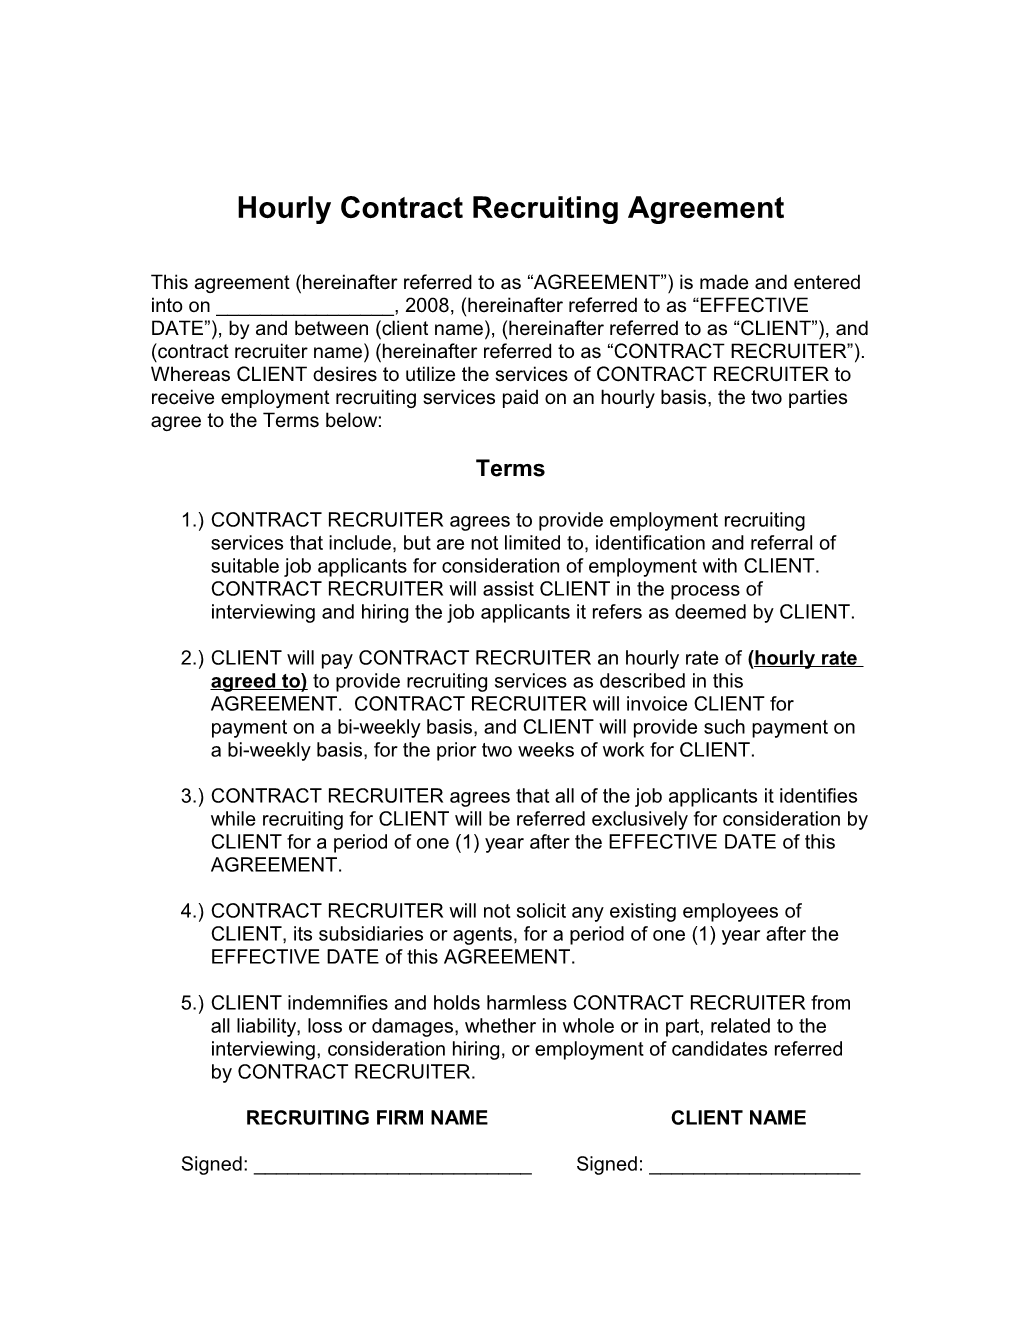 Hourly Contract Recruiting Agreement